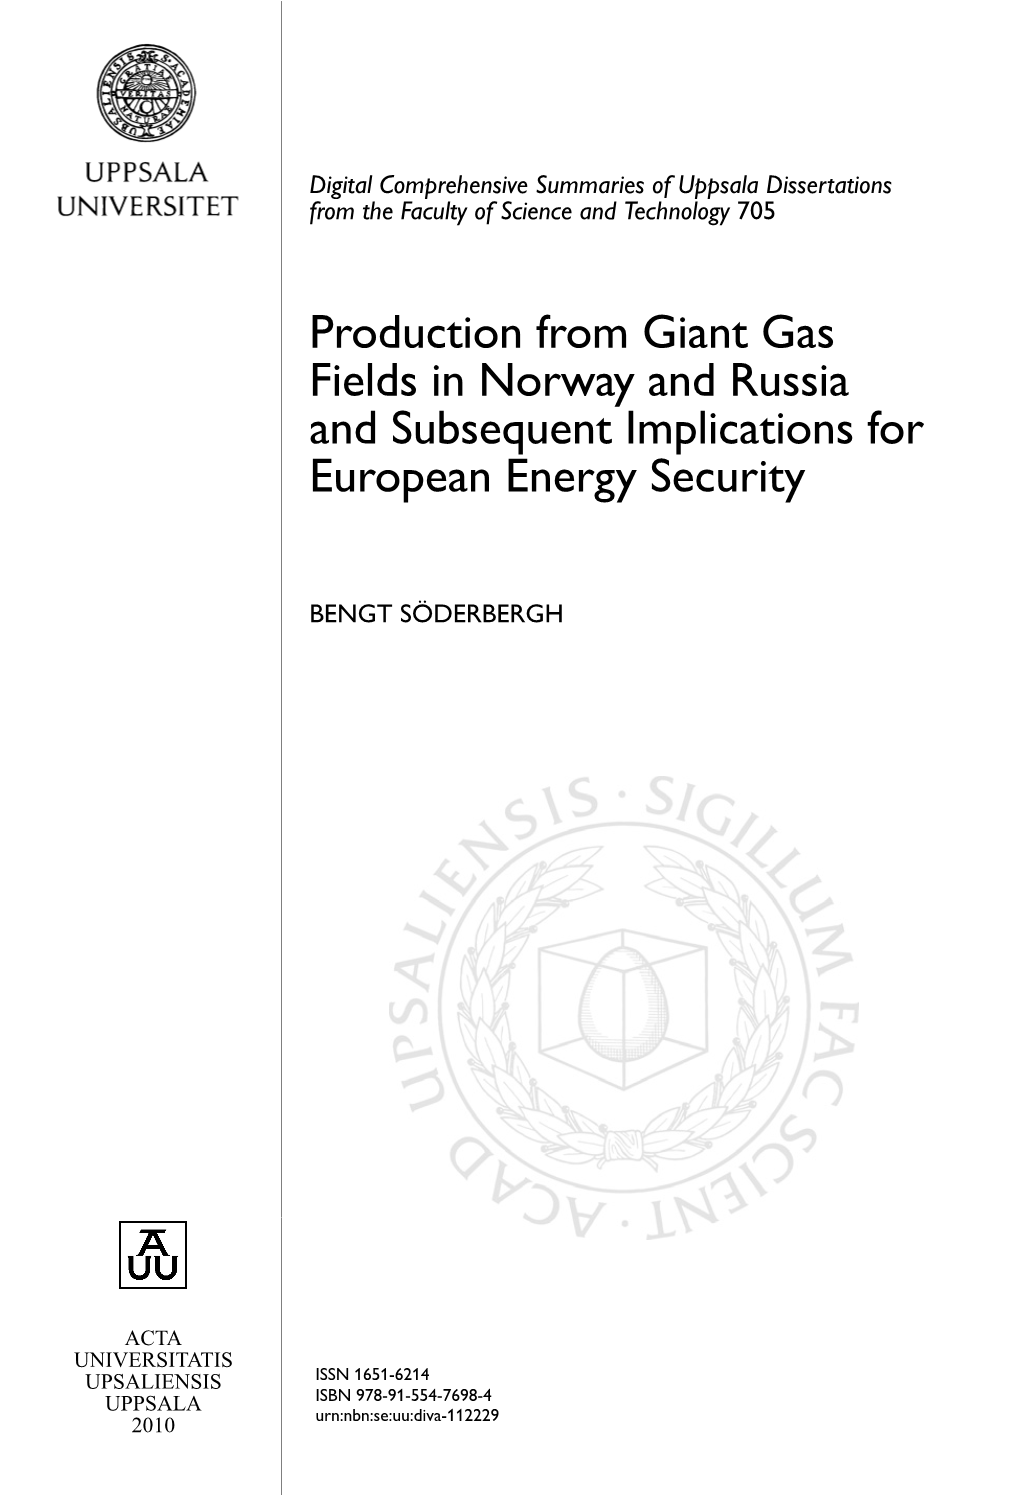 Production from Giant Gas Fields in Norway and Russia